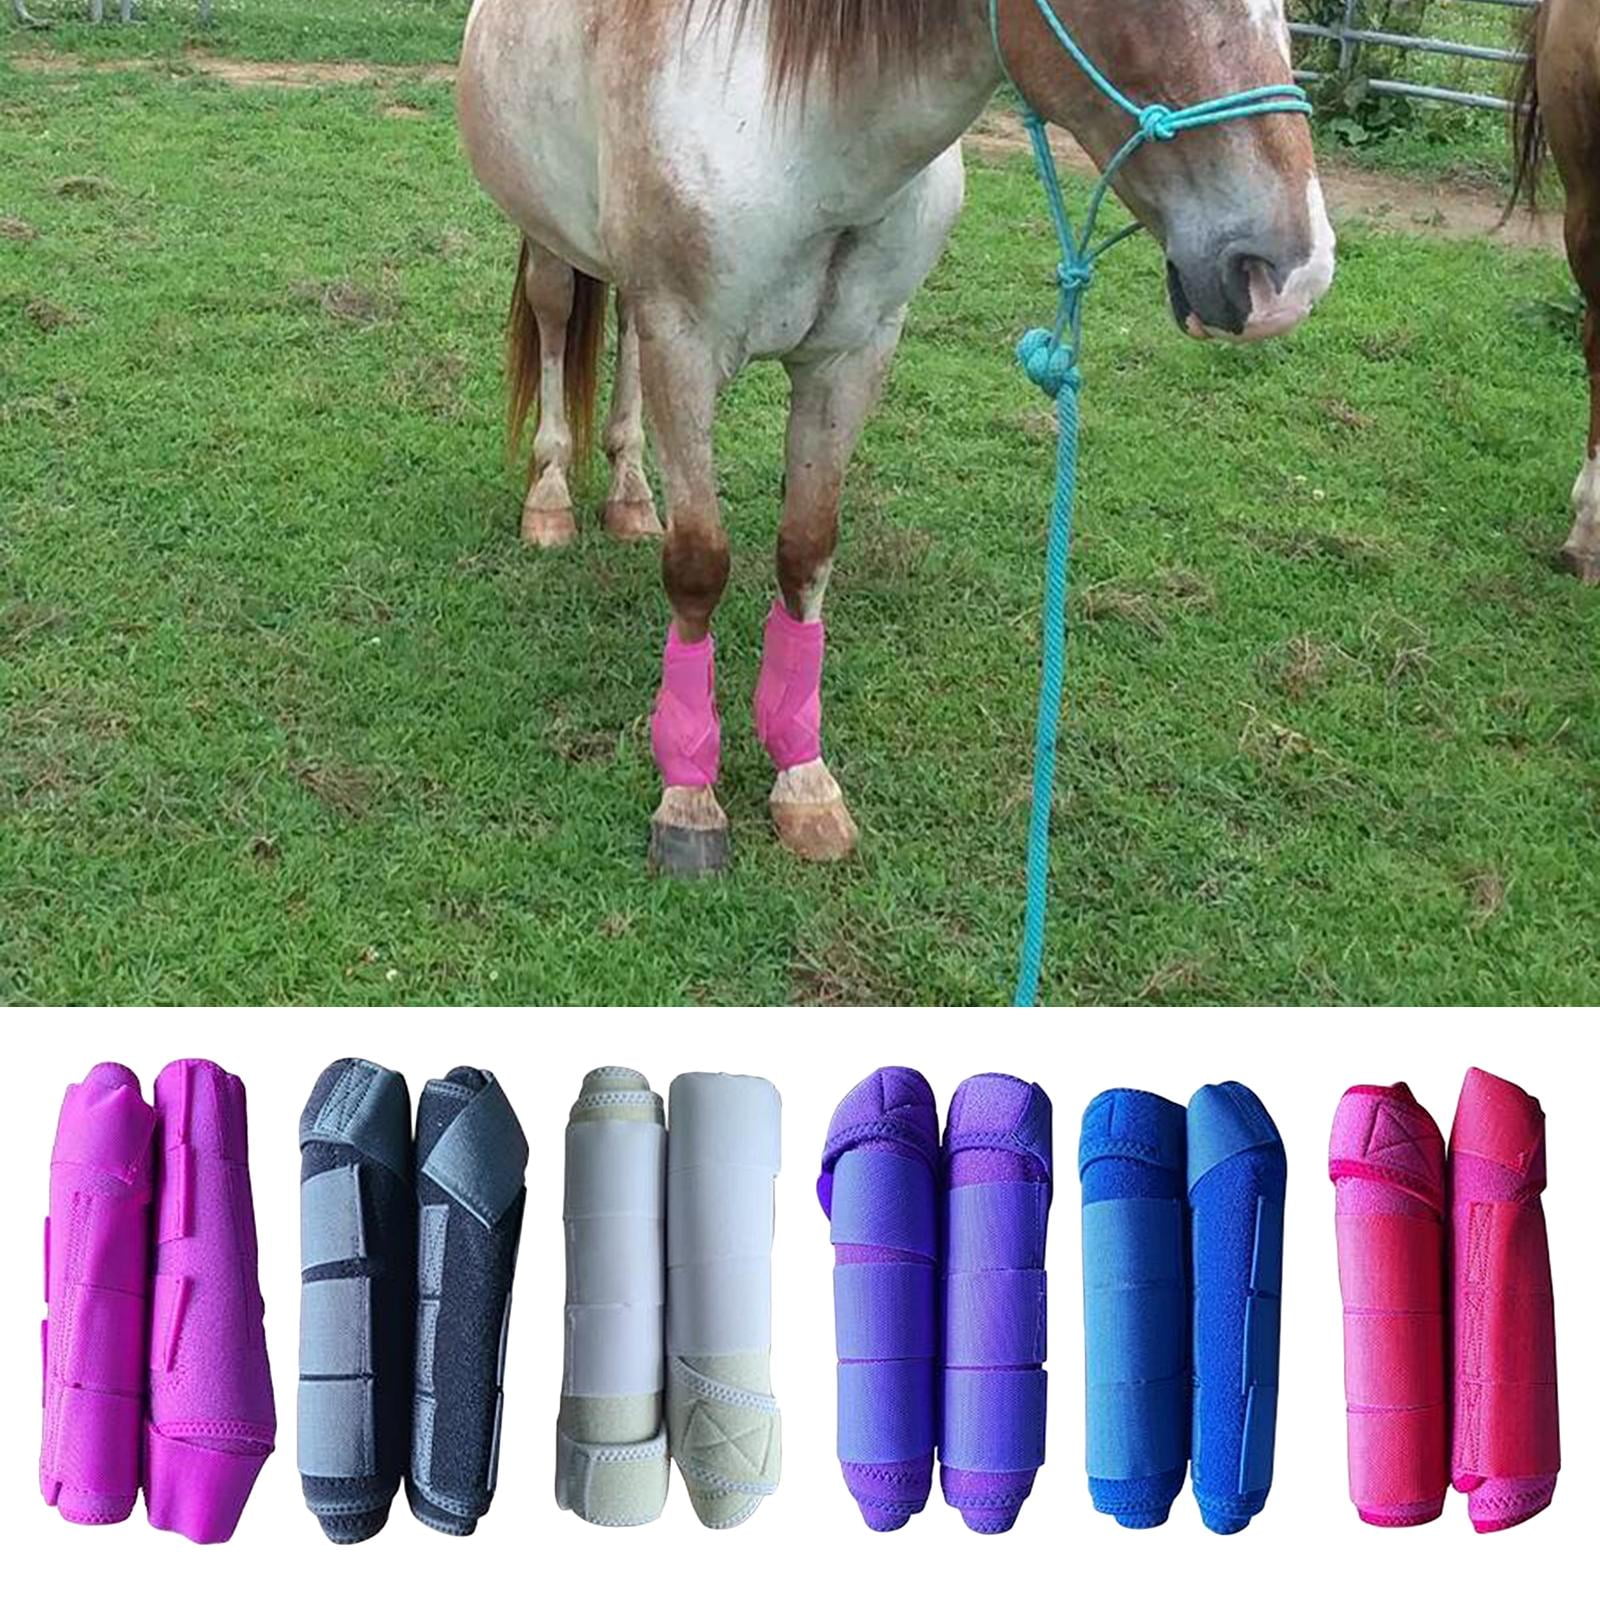 Details about   Horse Leg Guard Tendon Boots Leg Protection Training Jumping Boot Equipment Set 